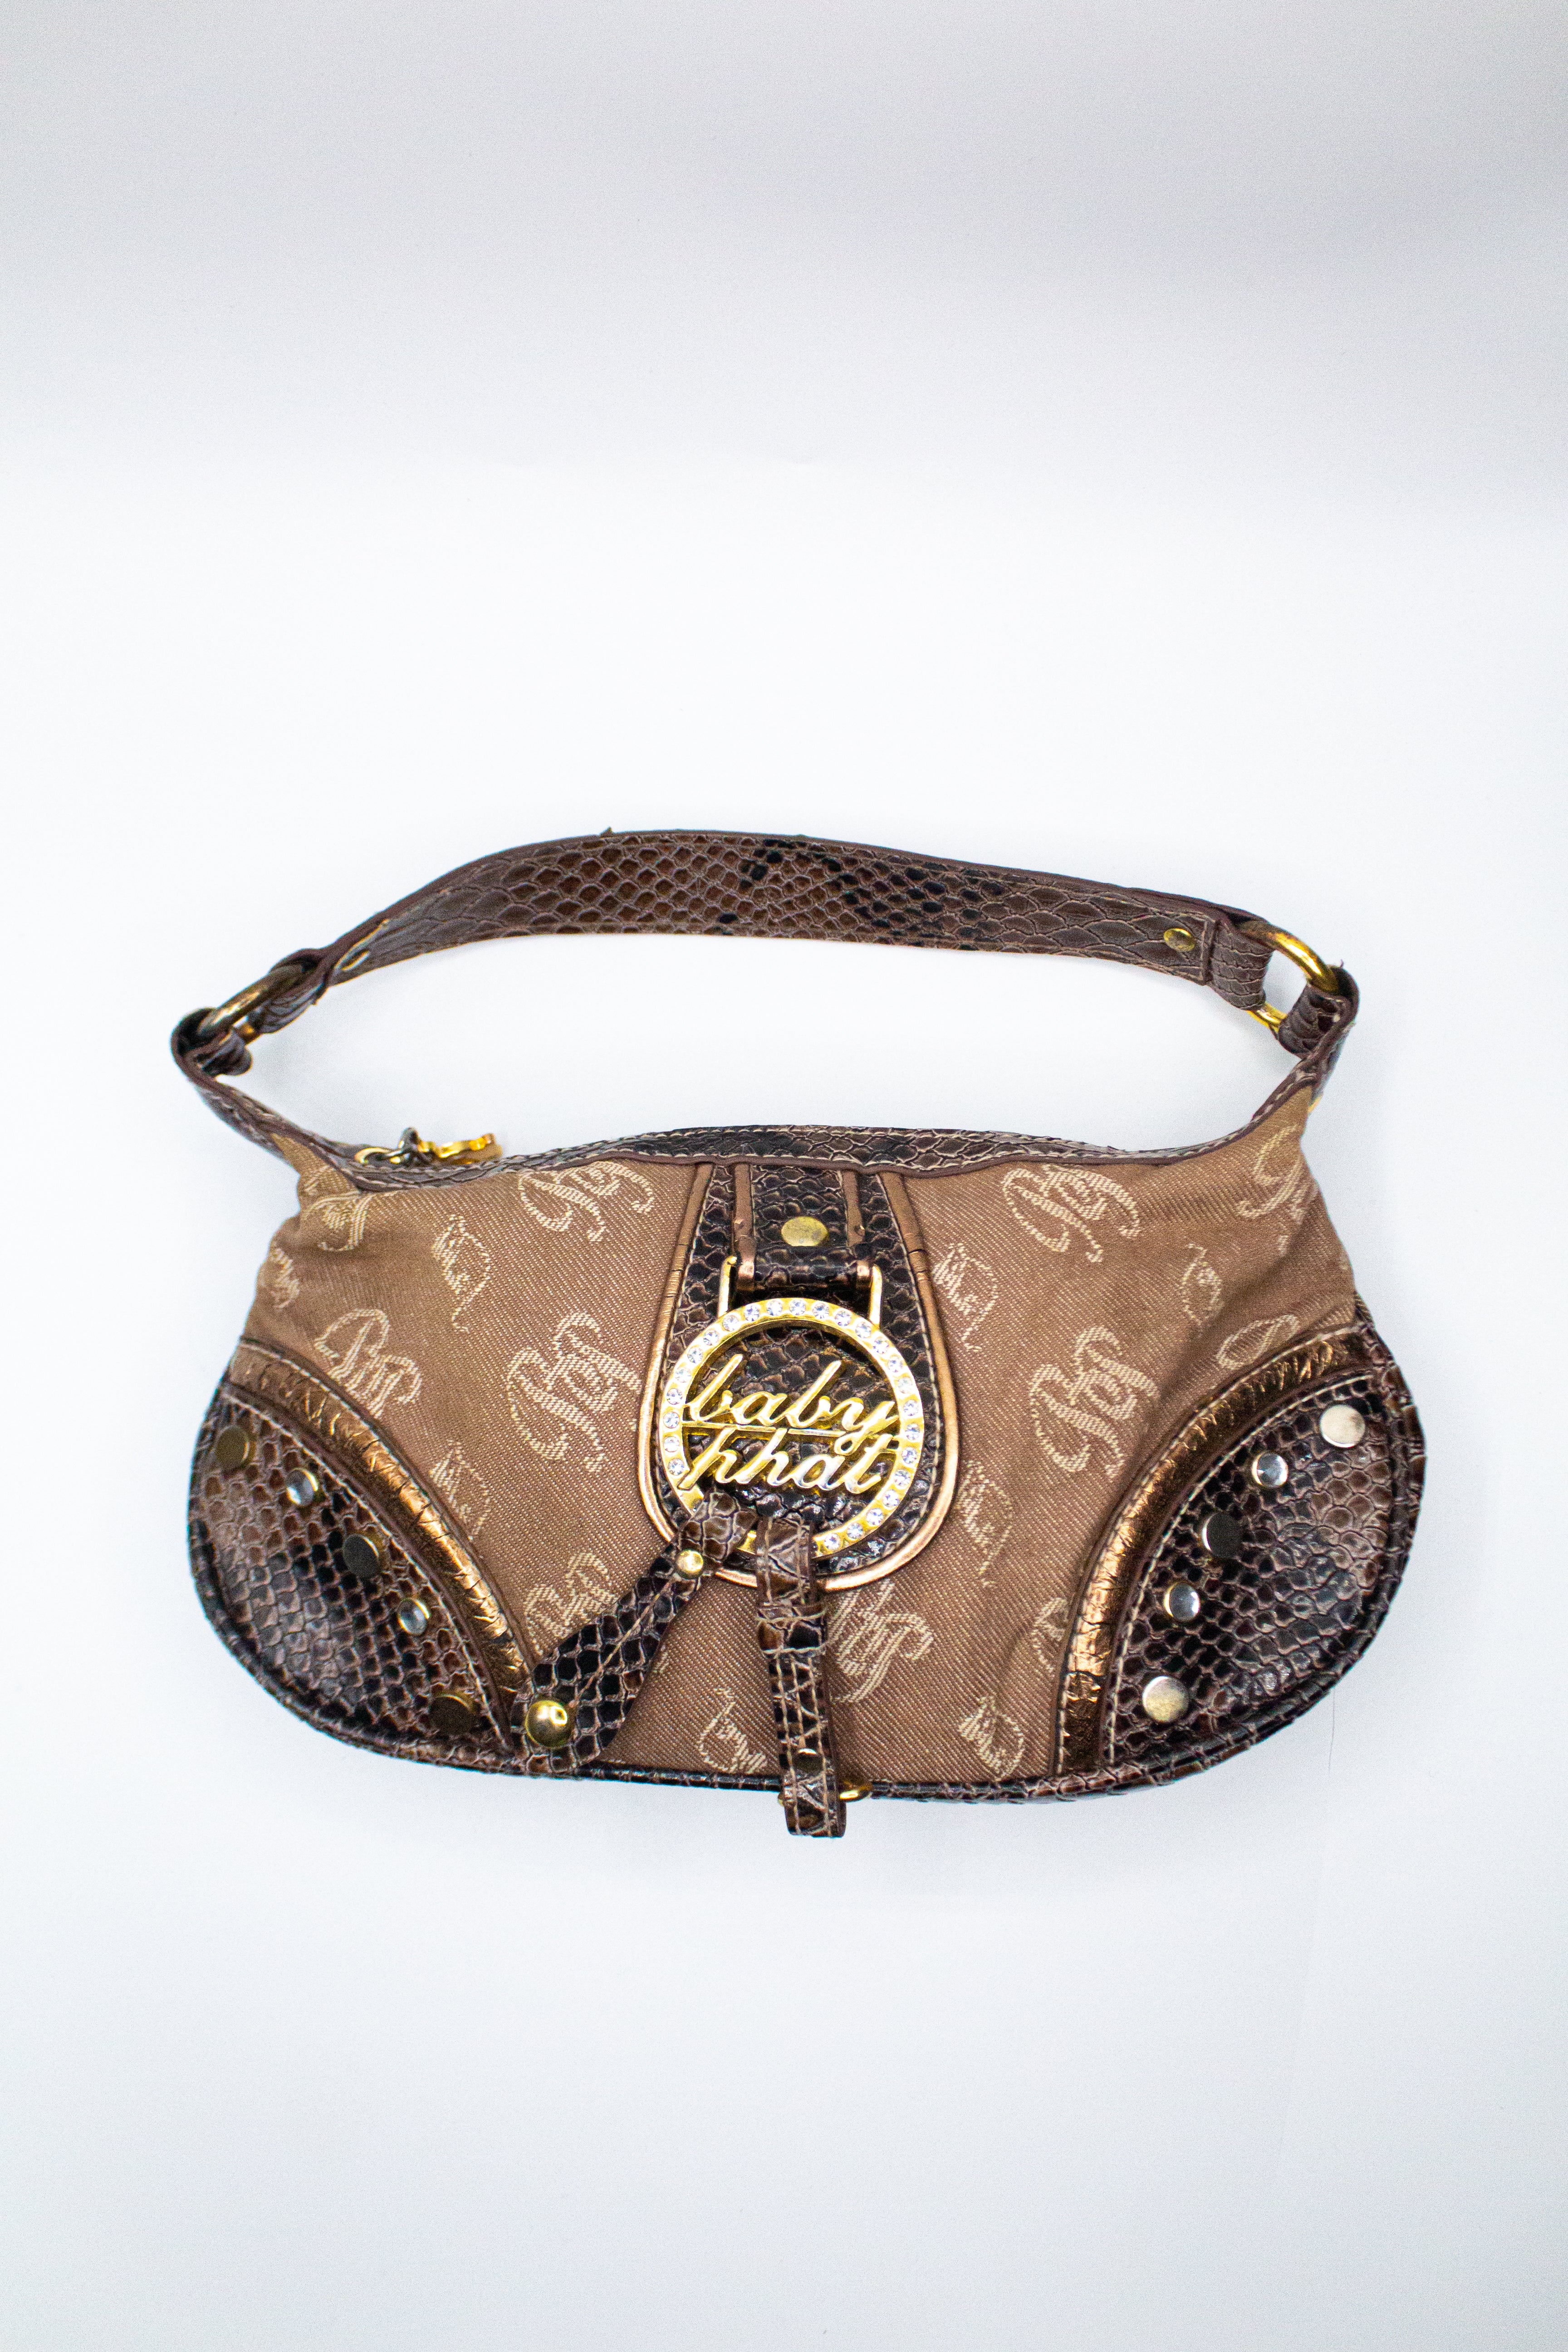 OG, baby phat purse for sale in 2023 | Baby phat purse, Purses for sale, Baby  phat